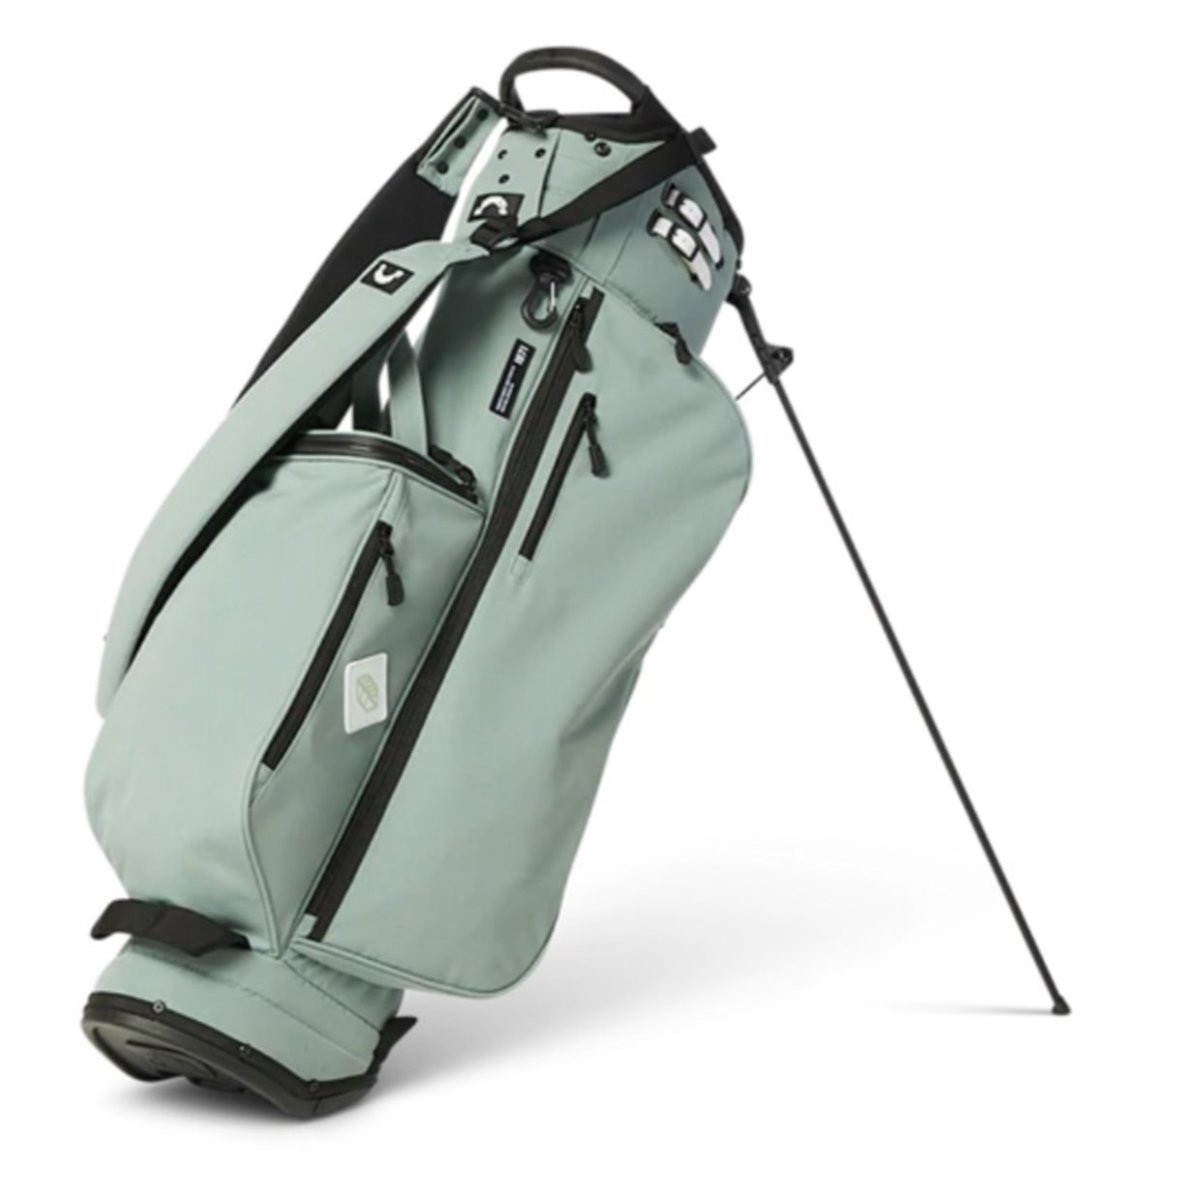 Shop the latest golf bags from Jones Sports Company - like the Trouper R Stand Bag - on Morning Read's online pro shop.